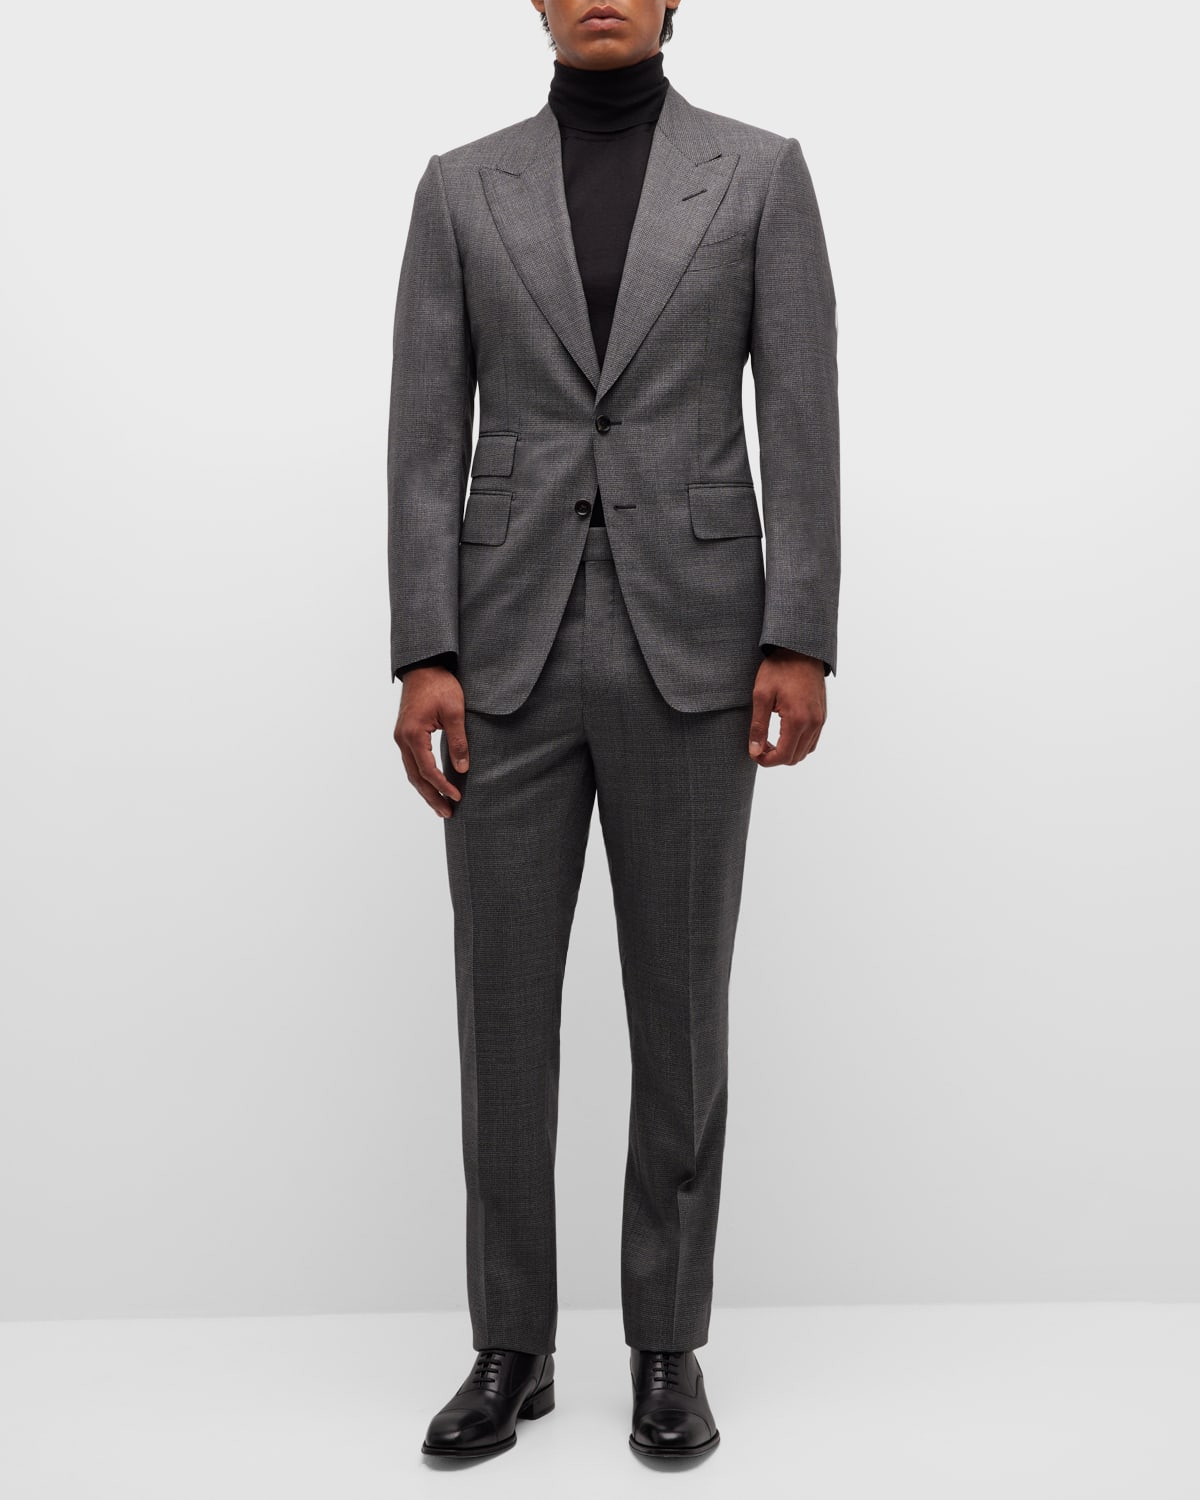 TOM FORD Men's Clothing & at Neiman Marcus